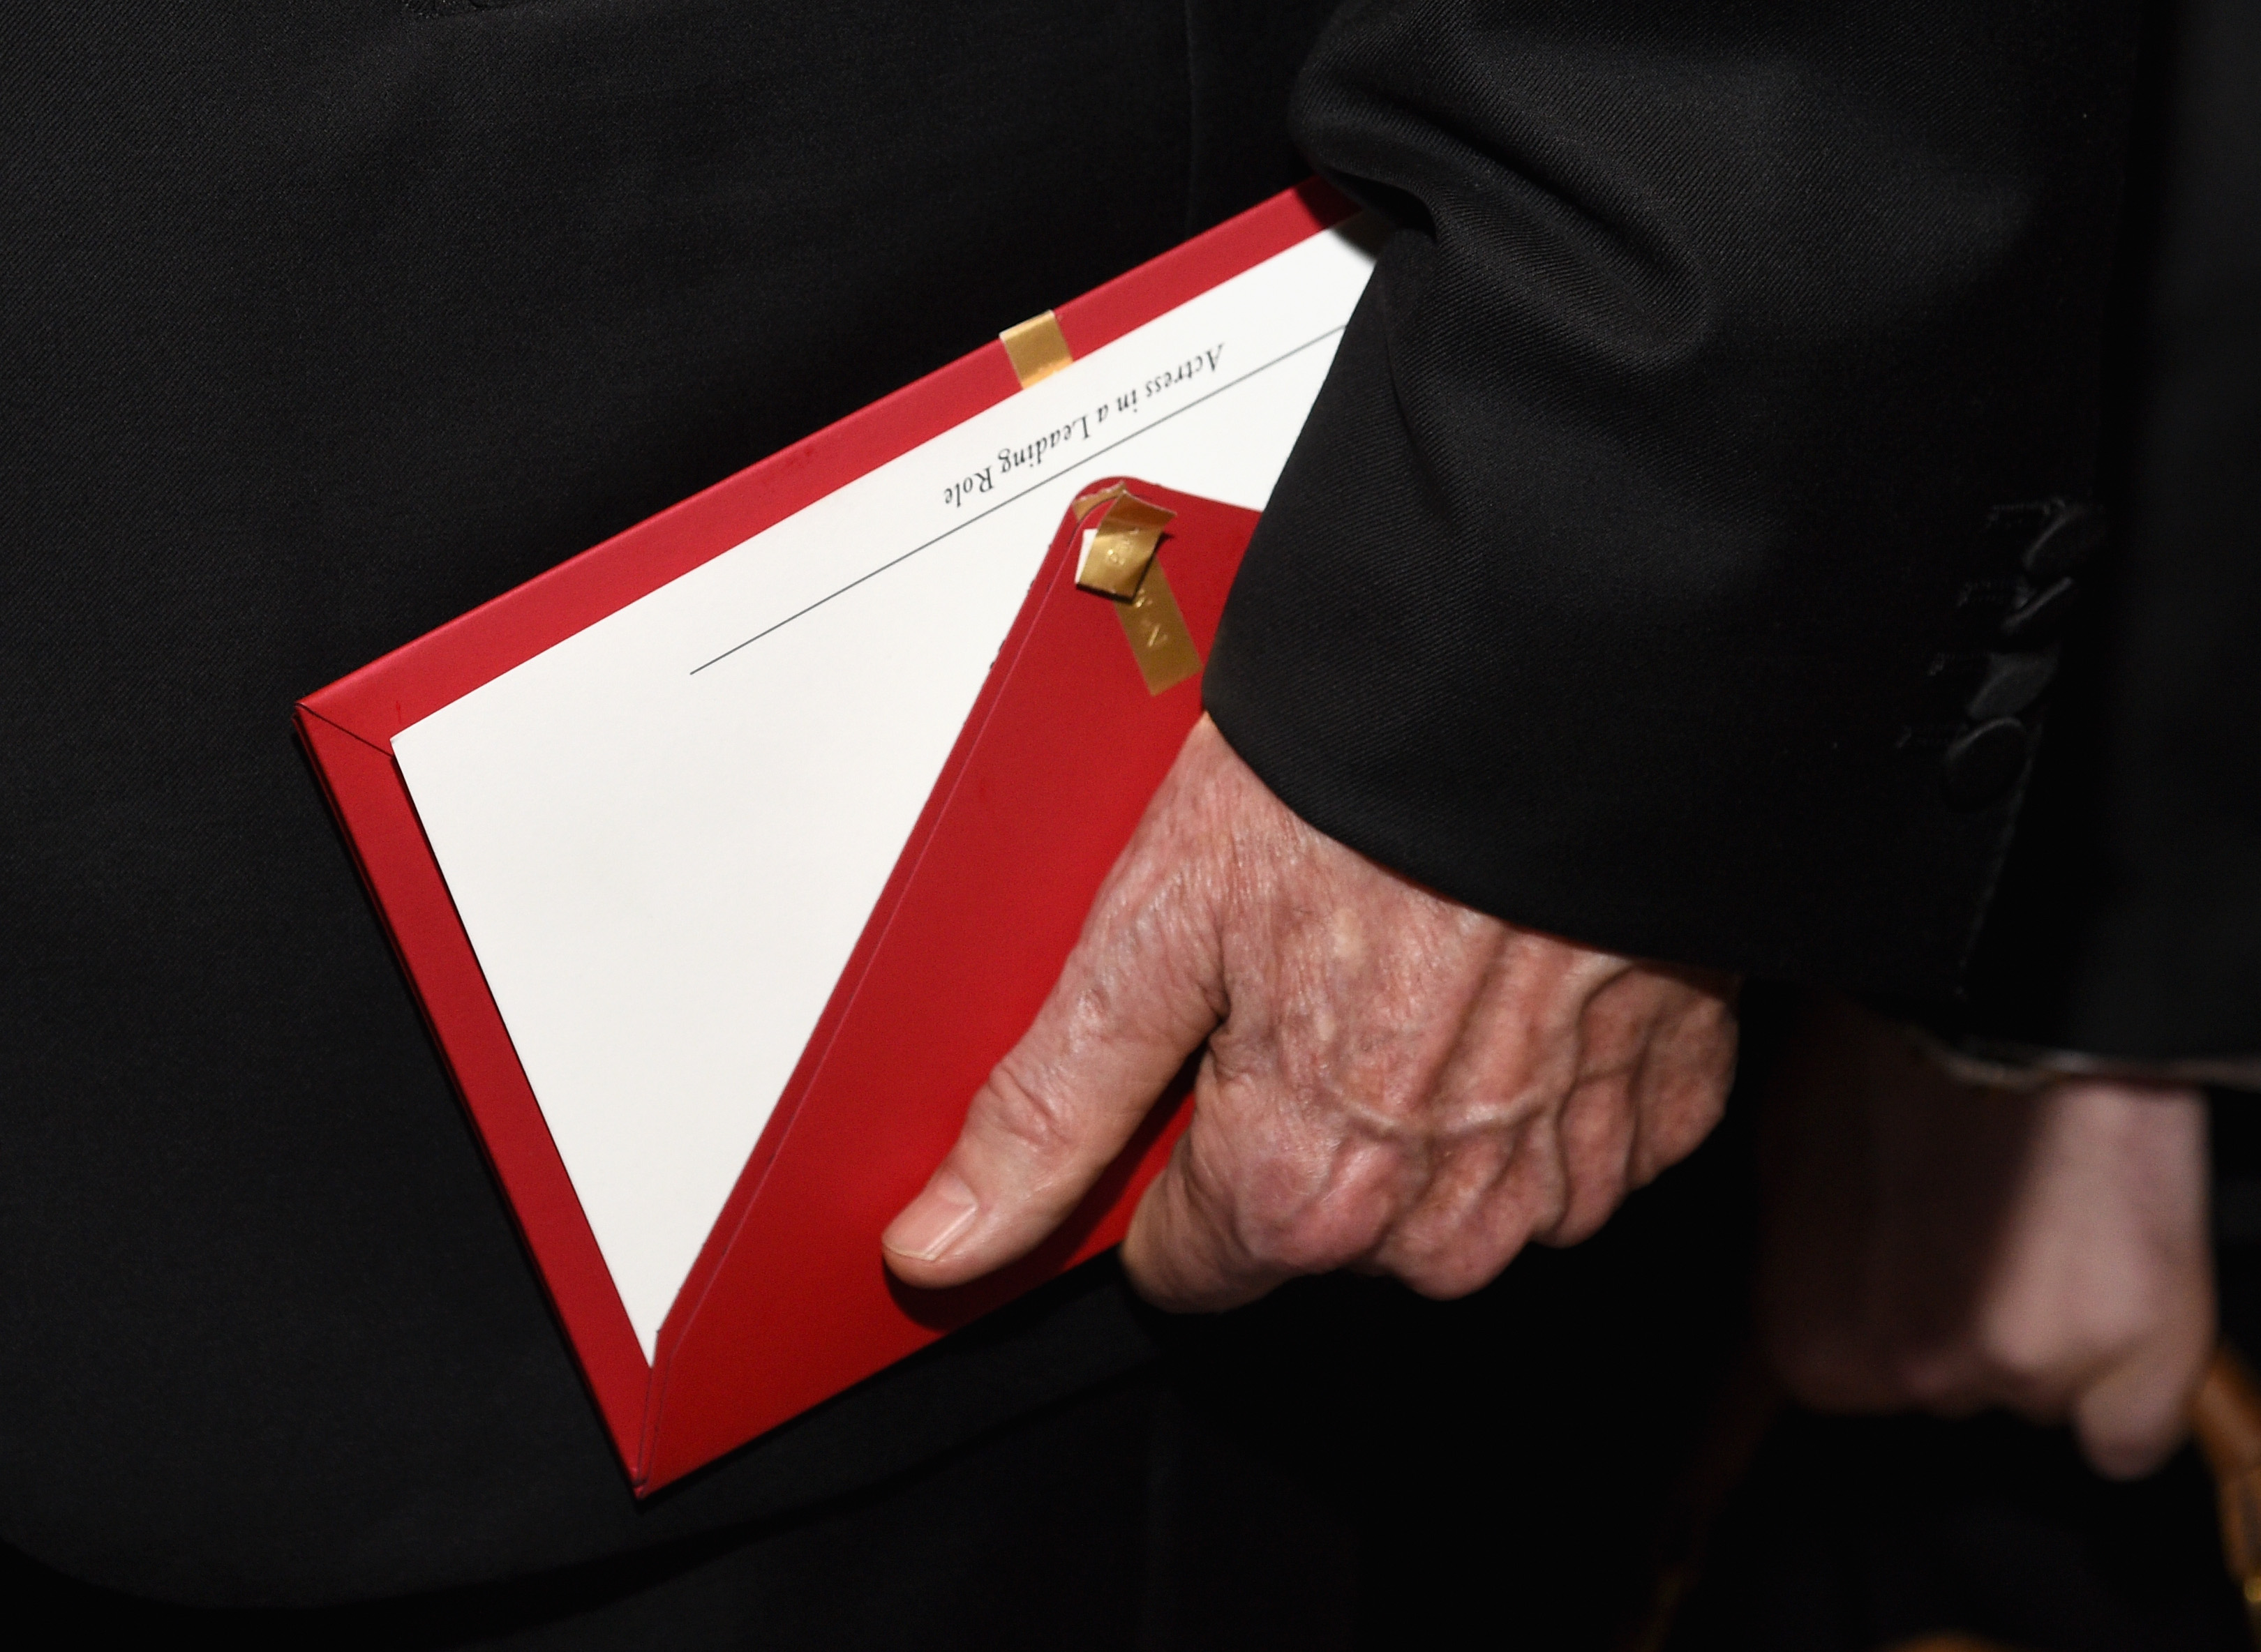 Actor/filmmaker Warren Beatty holds the envelope containing the wrong award announcement for Best Picture during the 89th Annual Academy Awards Governors Ball at Hollywood & Highland Center on February 26, 2017 in Hollywood, California. (Photo by Kevork Djansezian/Getty Images)